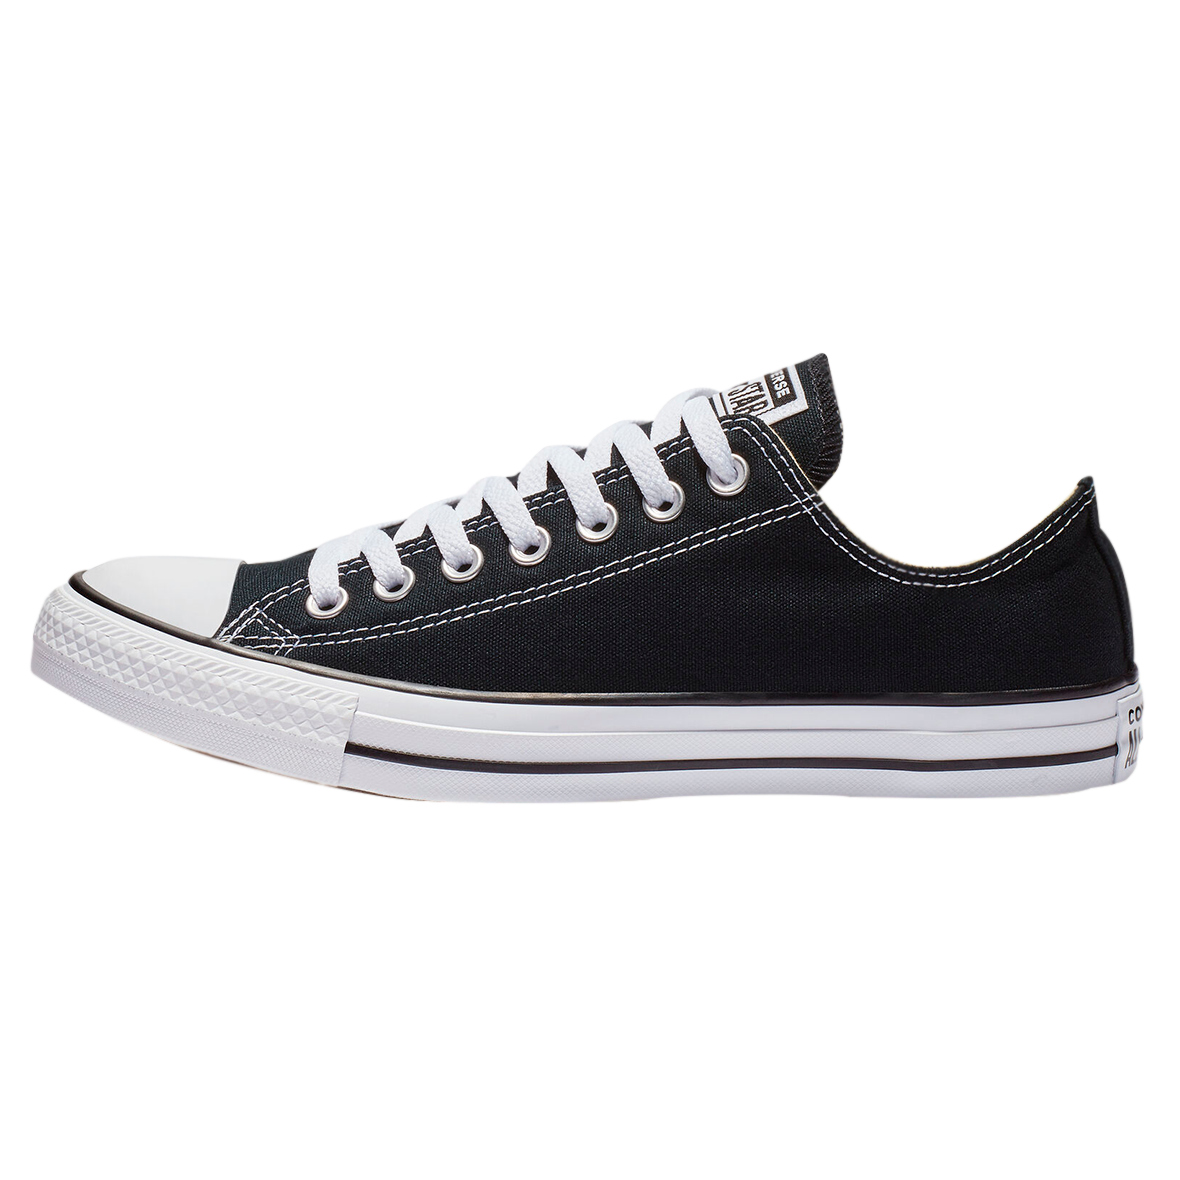 CONVERSE CHUCK TAYLOR ALL STAR OX UNISEX COLOR NEGRO - 0